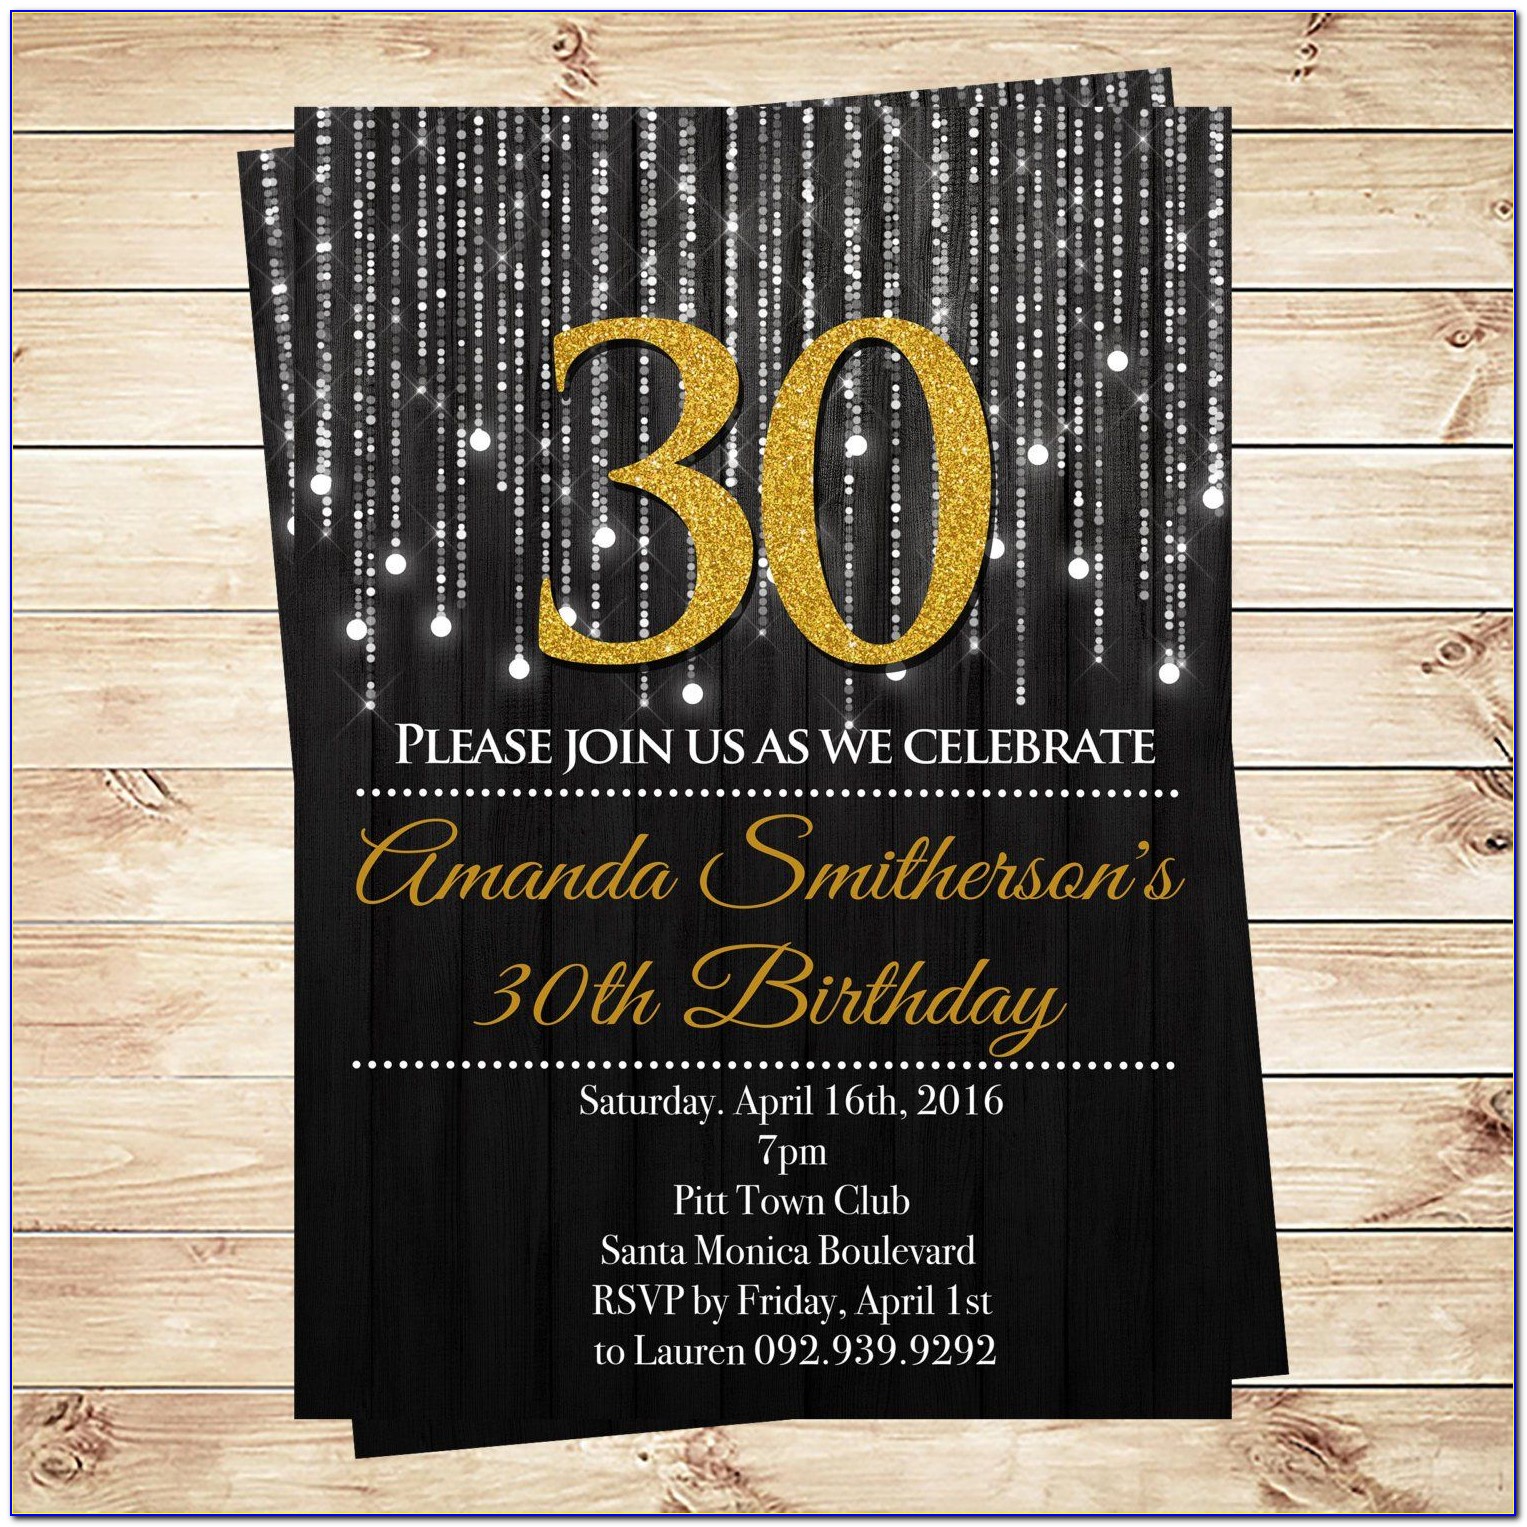 30th Birthday Invitation Templates For Her